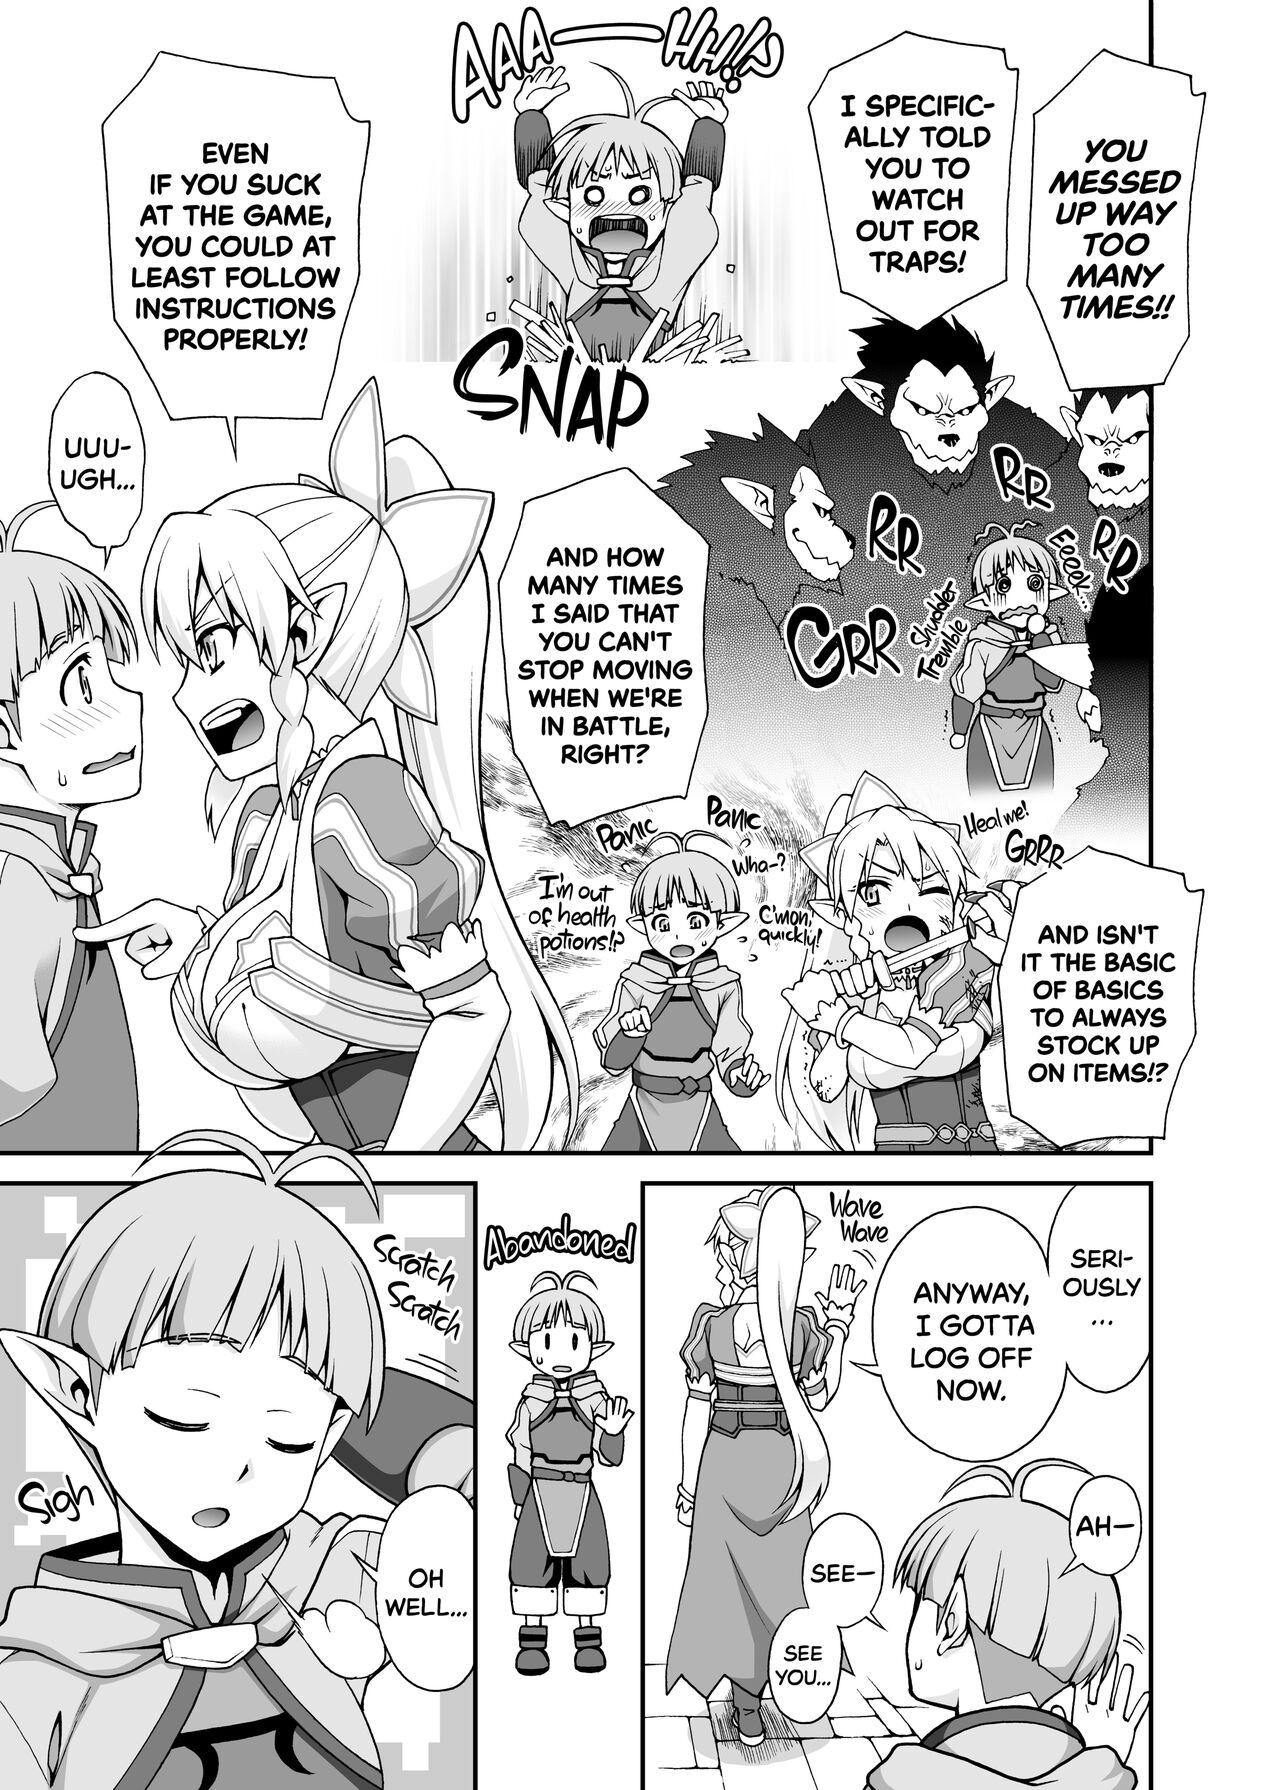 Throatfuck Delphinium Madonna 2 - Sword art online Family Roleplay - Page 4